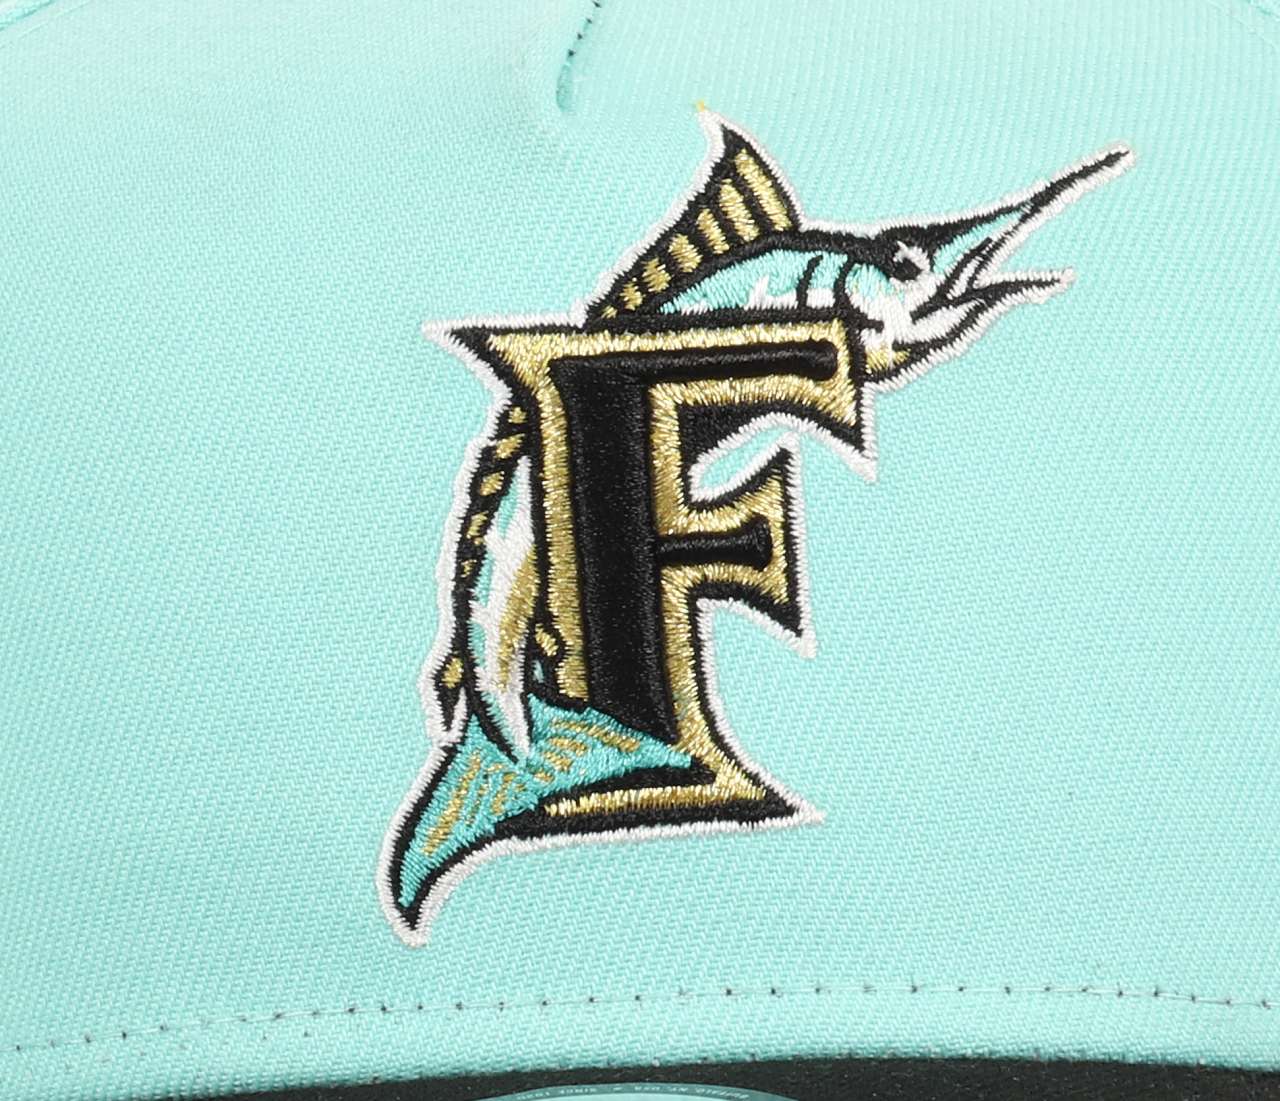 Florida Marlins MLB 10th Anniversary Sidepatch Cooperstown Mint Black 9Forty A-Frame Snapback Cap New Era